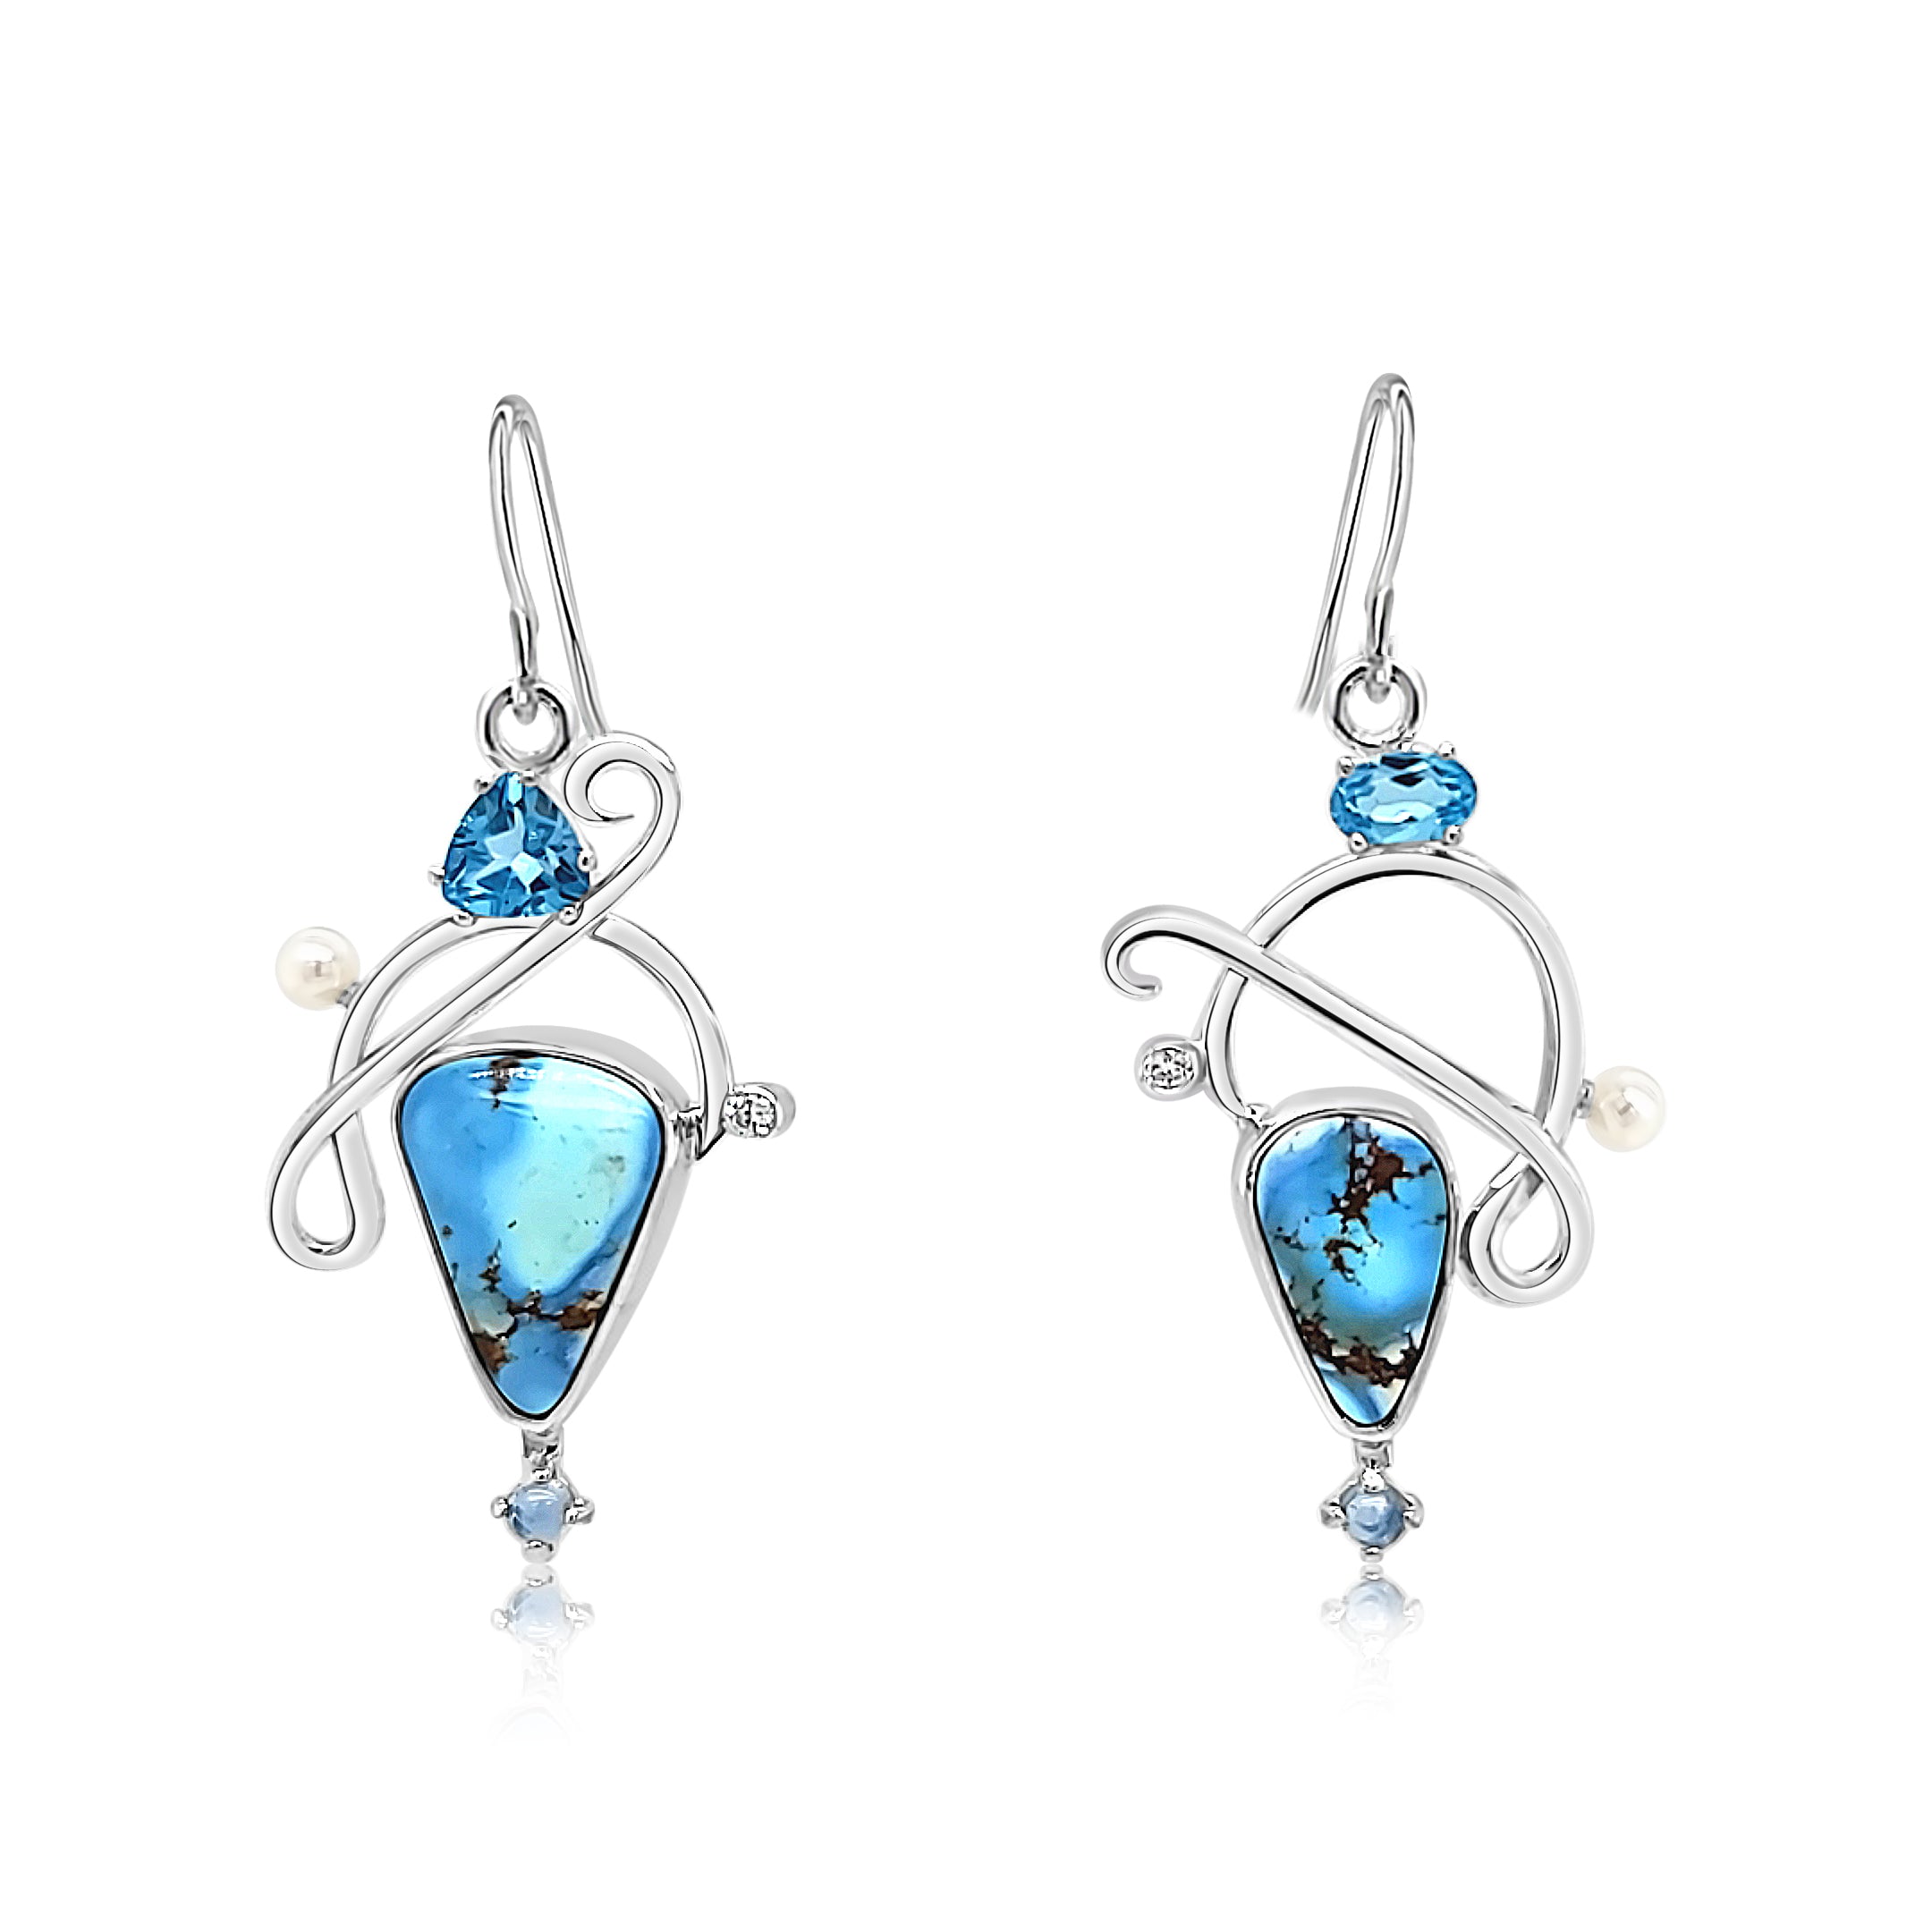 Asymmetric Golden Hills Turquoise, Swiss Blue Topaz, Cubic Zirconia and Freshwater Pearl earrings set in Sterling Silver.